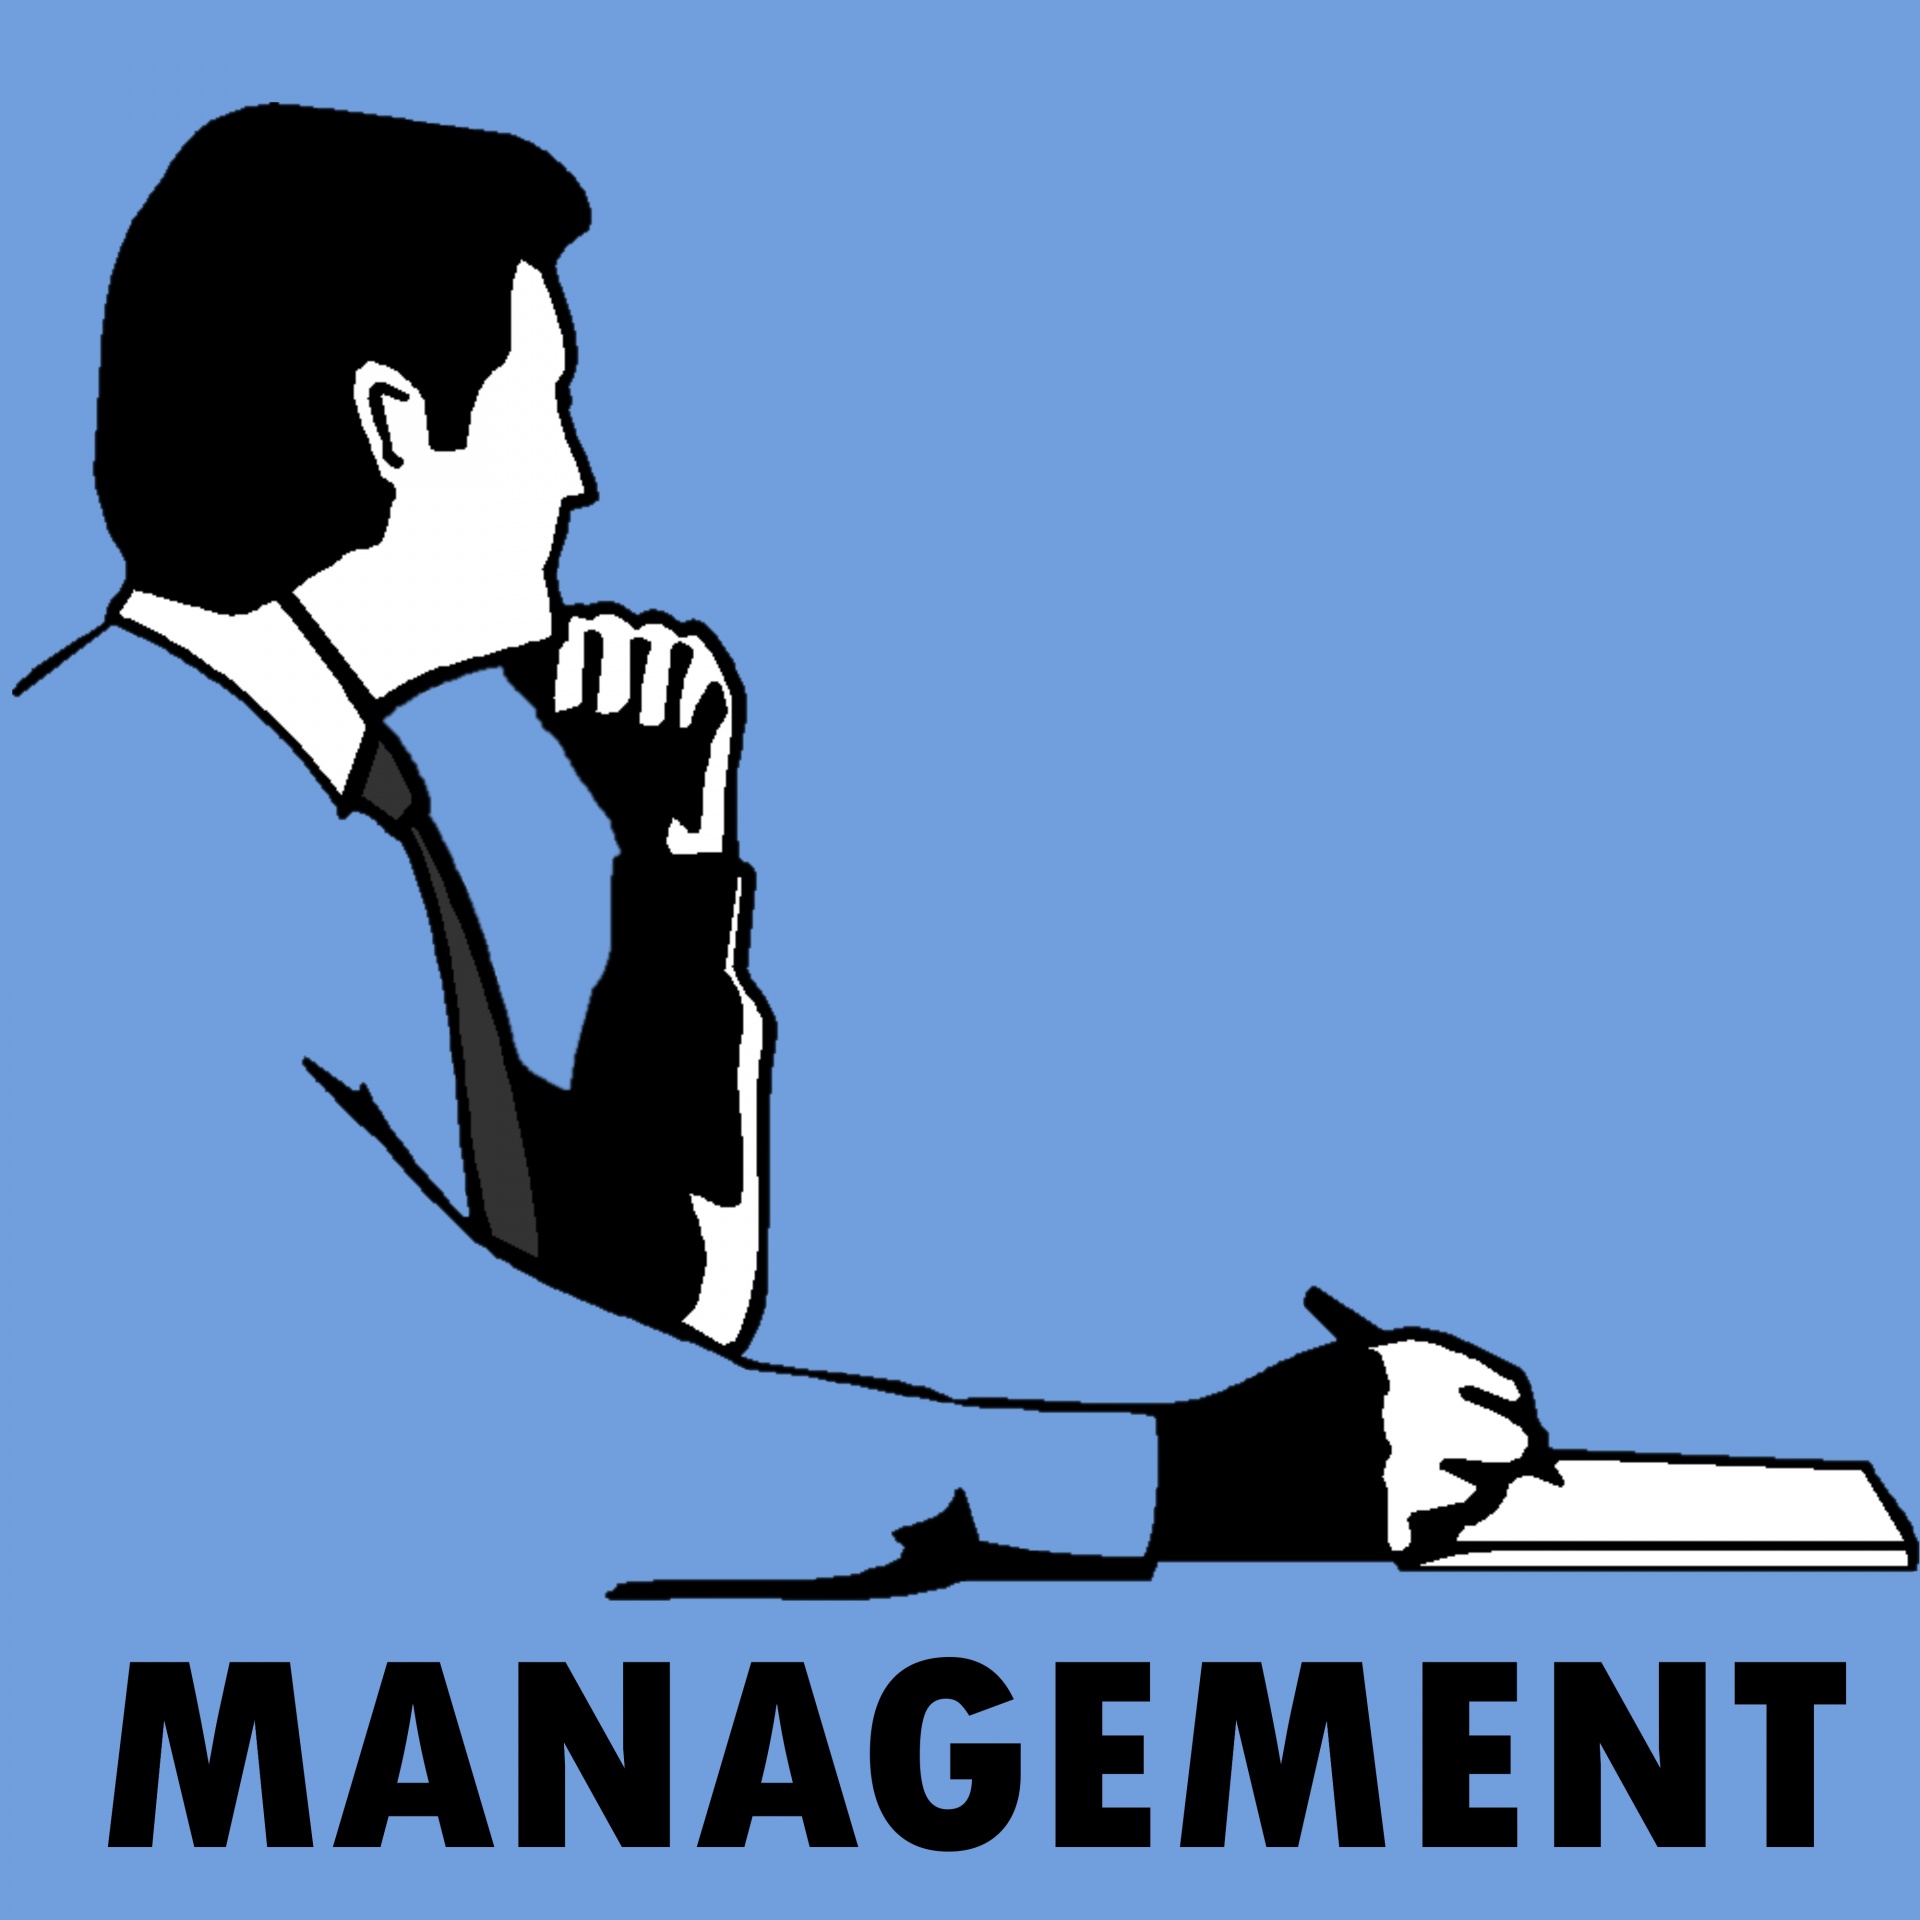 business-management-sign-free-stock-photo-public-domain-pictures